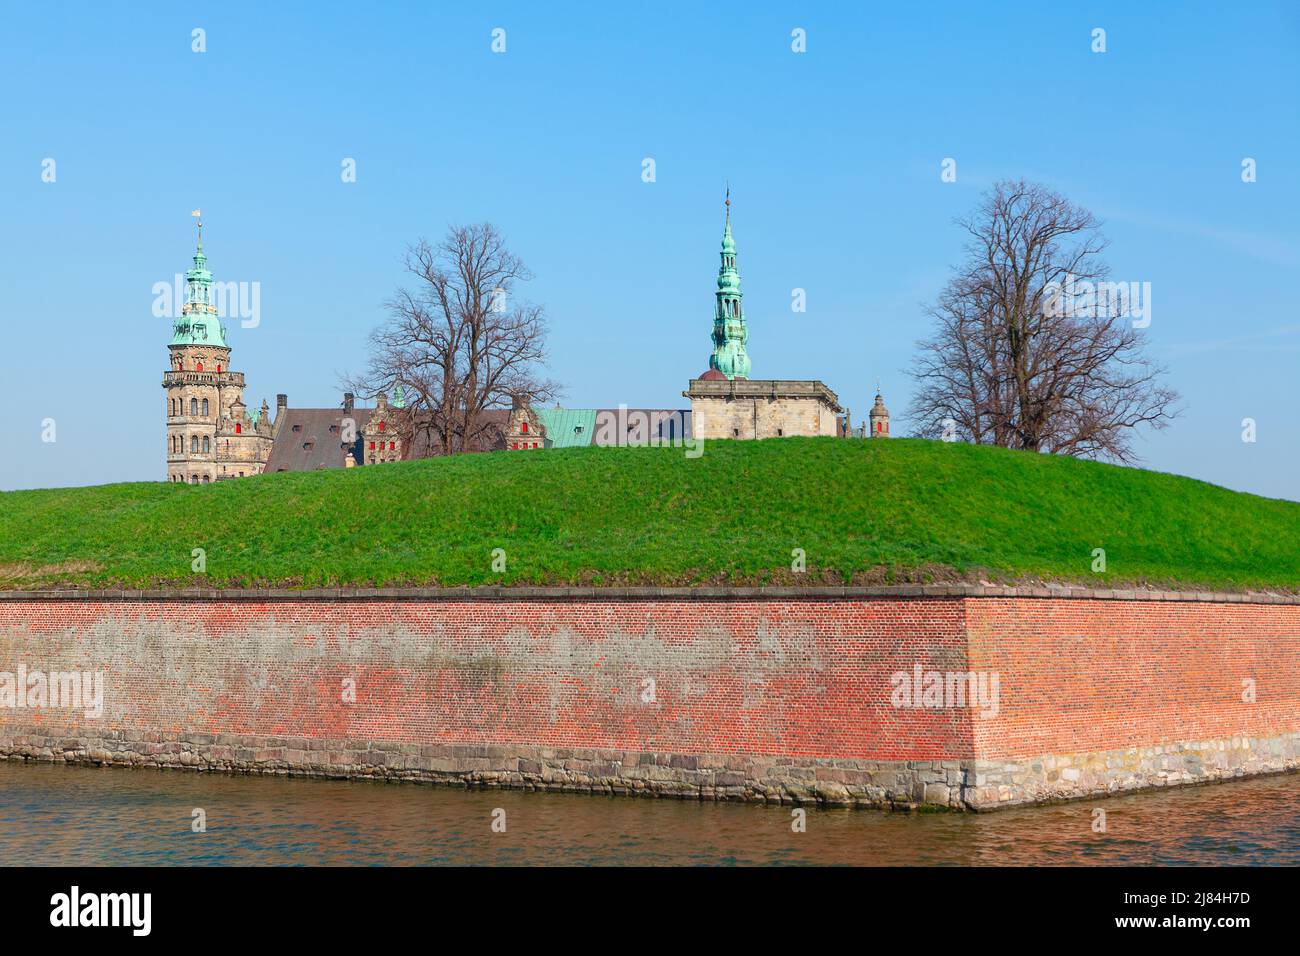 Castle surrounded by water canal . Kronborg Slot with fortification in Helsingor, Denmark Stock Photo